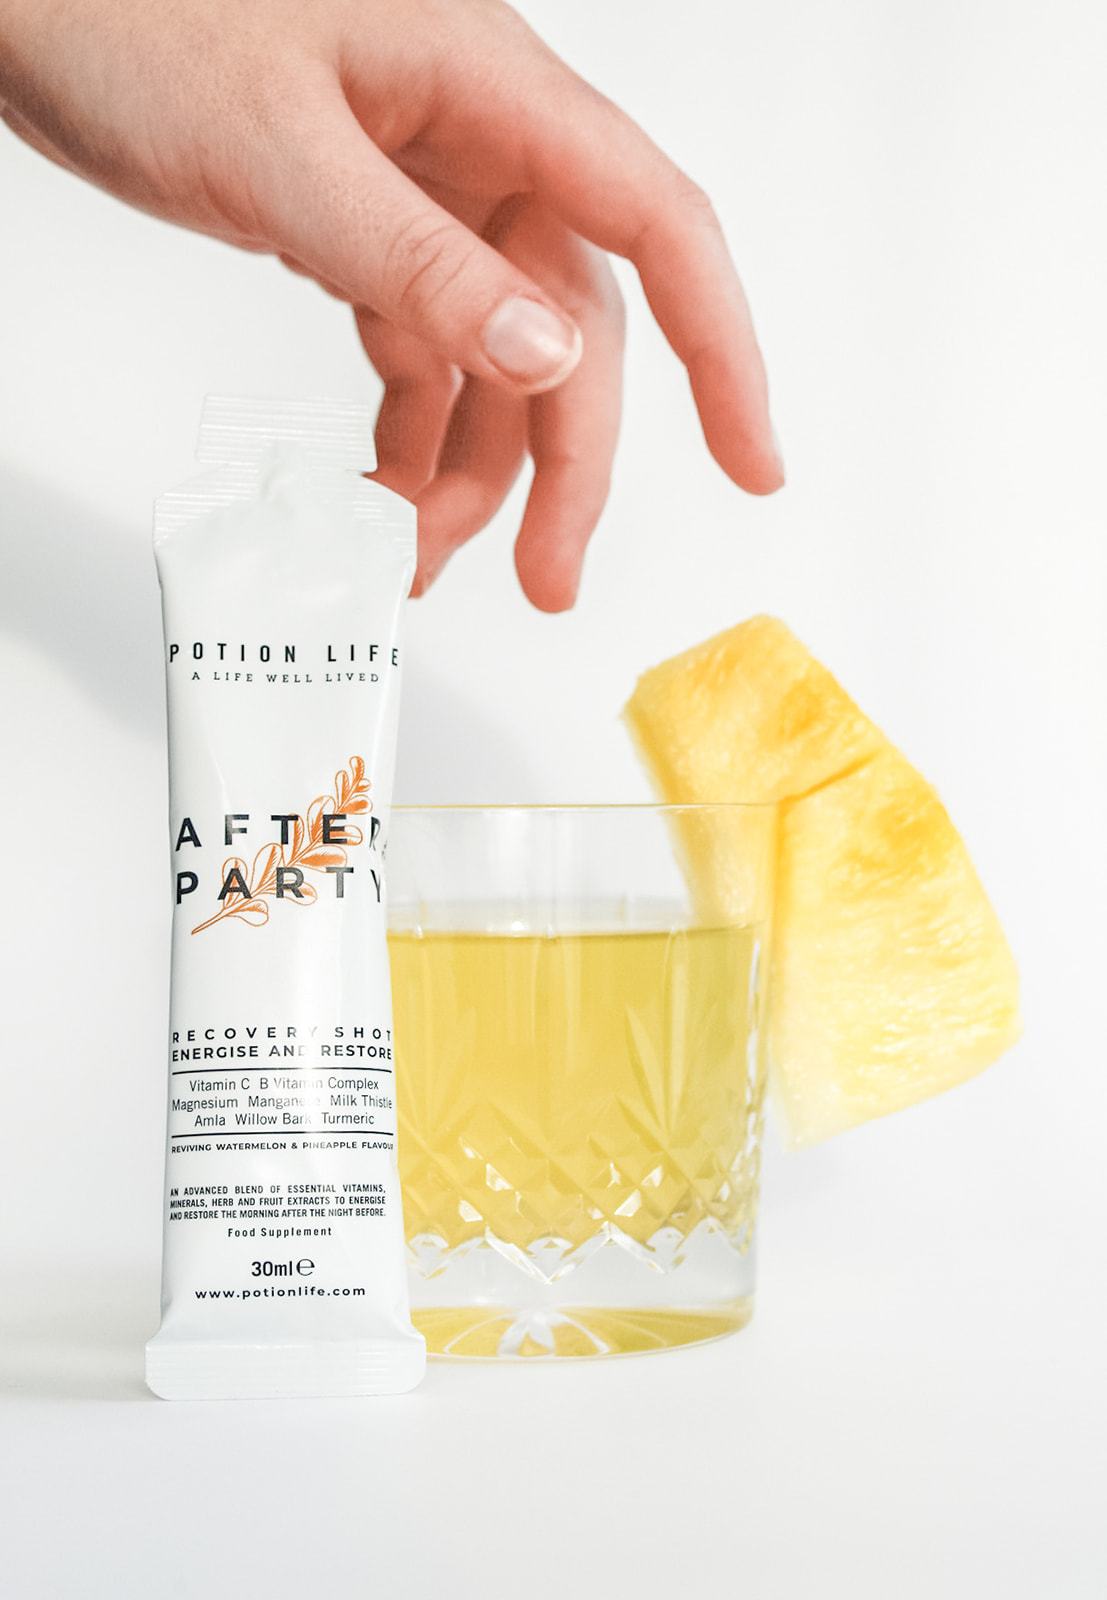 After Party Vitamin Energy Shots 30ml Potion Life Store 